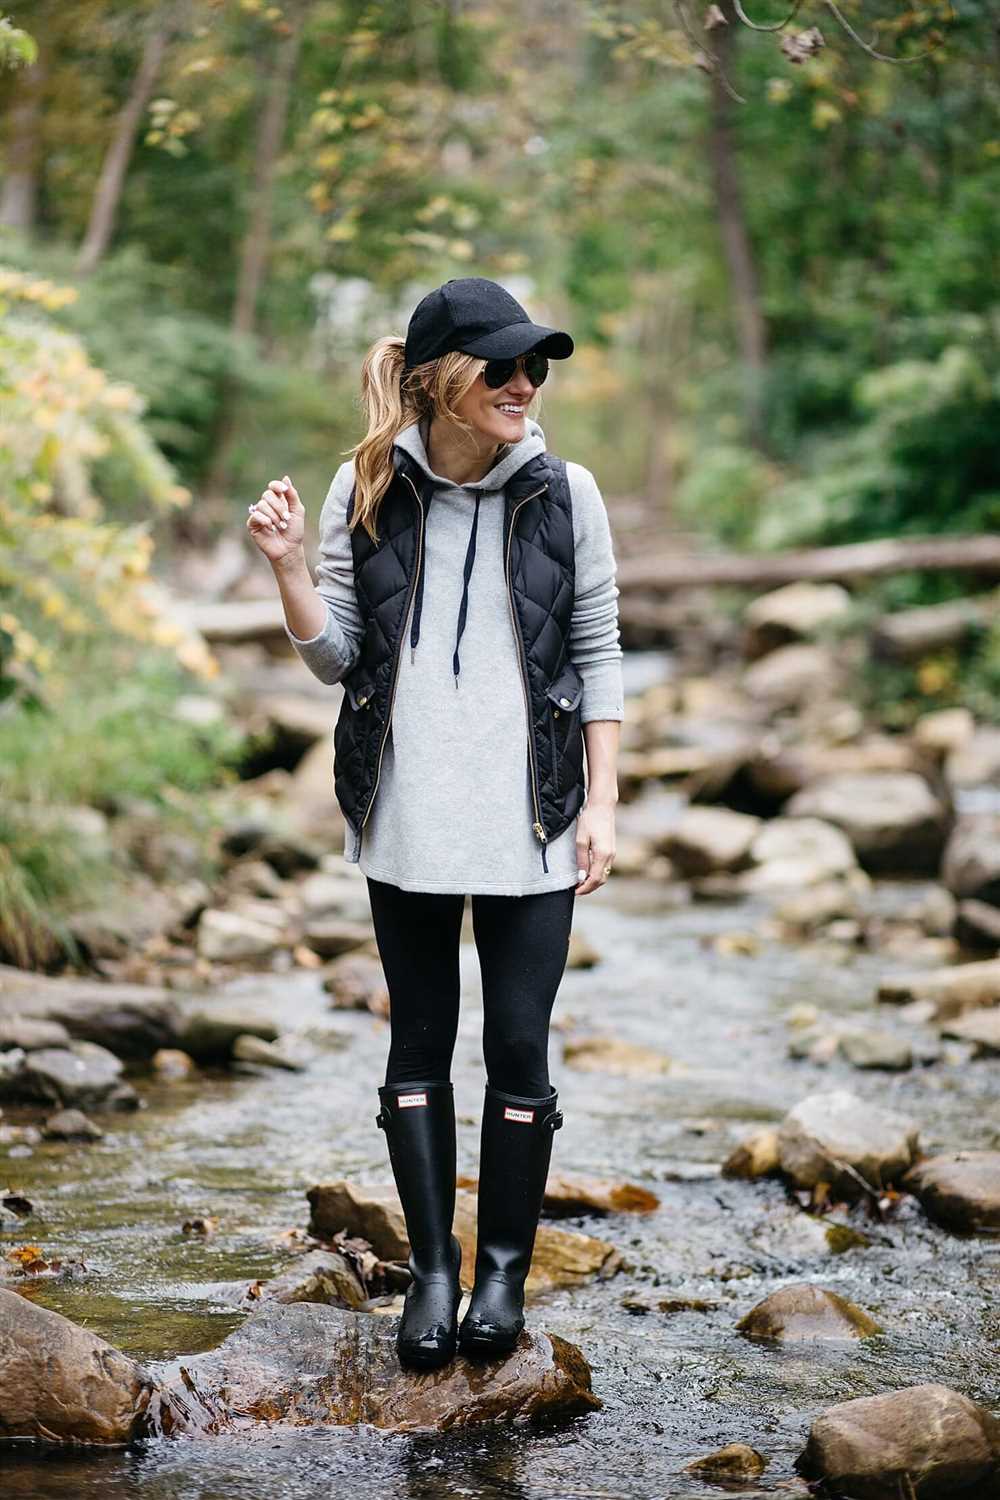 Rock the Summer Style with Your Favorite Hunter Boots